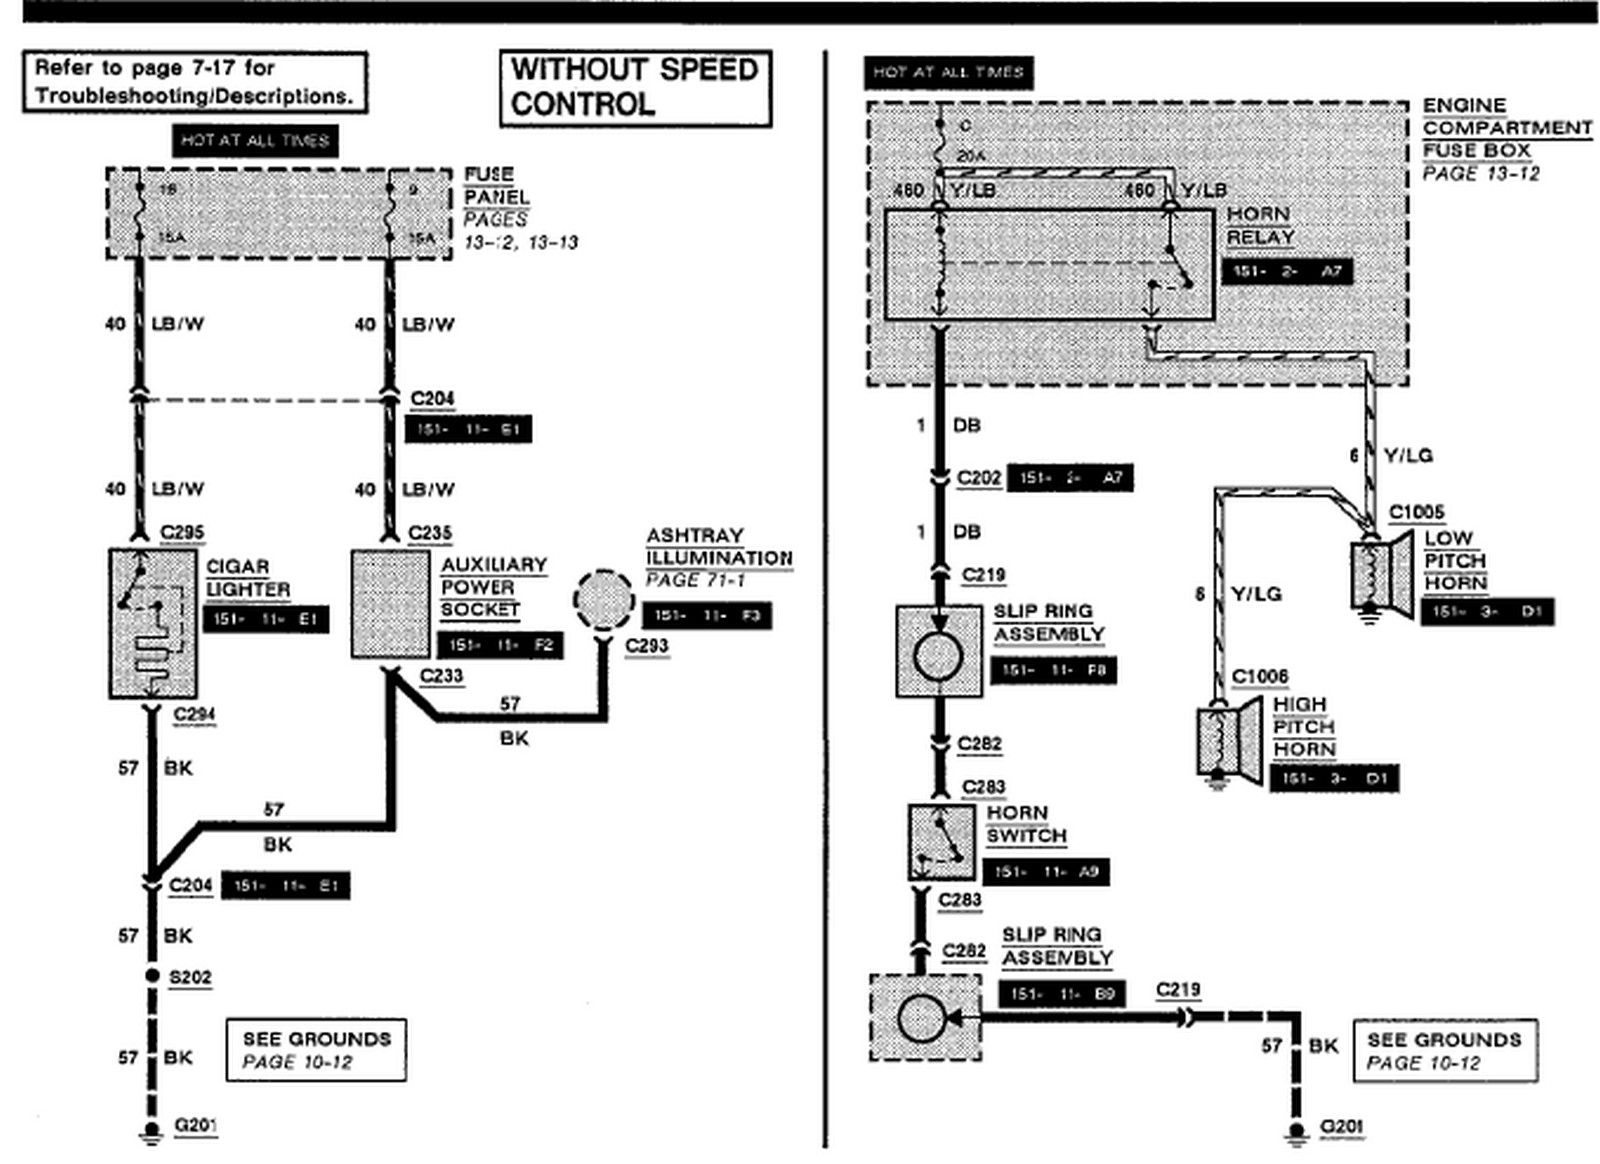 26 2003 Ford F150 Wiring Diagram - Wiring Database 2020 2003 Ford F150 Trailer Wiring Harness Diagram